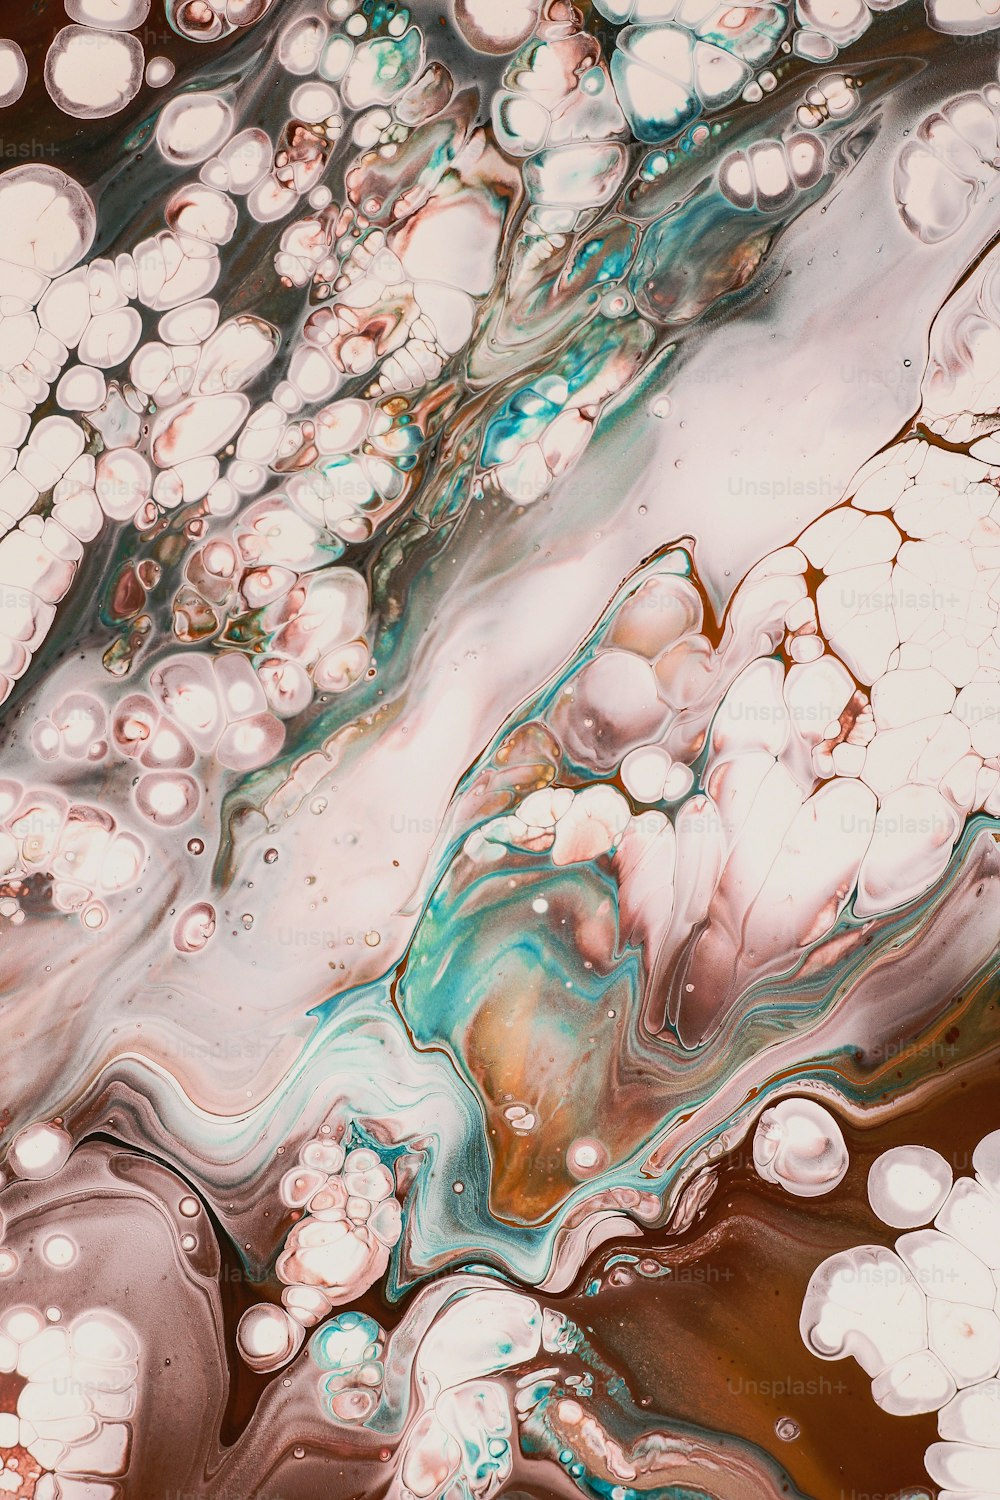 a close up of a liquid filled with bubbles